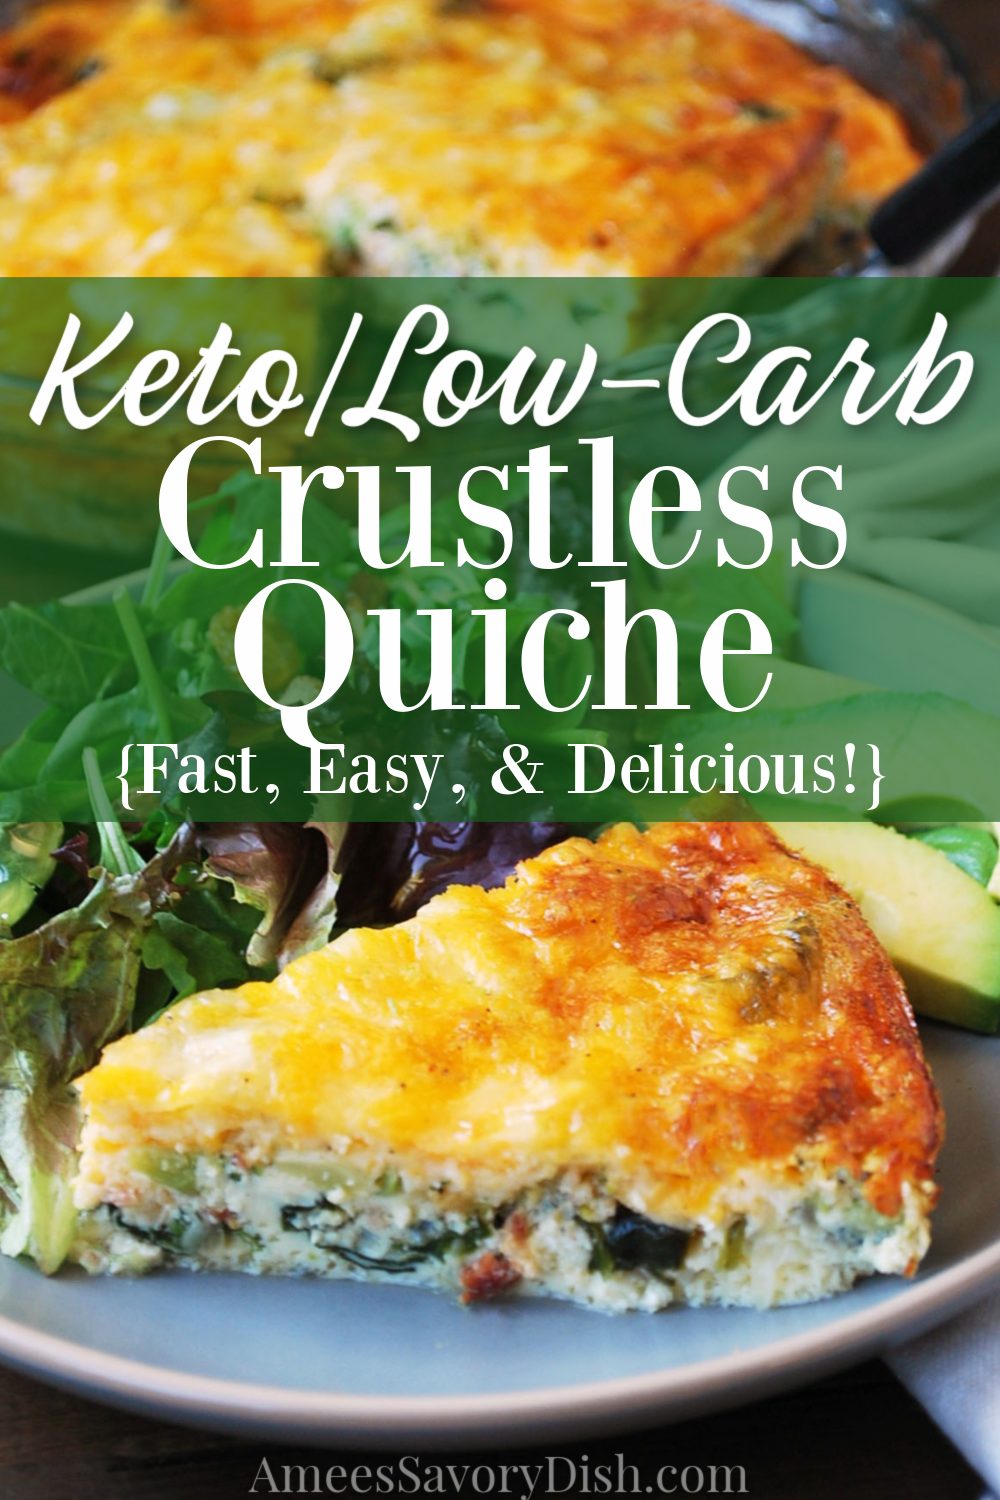 A simple and delicious low-carb crustless quiche recipe made with bacon, broccoli, fresh baby spinach, onions, and cheese.  #ketorecipe #ketoquiche #lowcarbquiche #ketobreakfast #ketorecipe #loadedquiche #spinachquiche #crustlessquiche via @Ameessavorydish